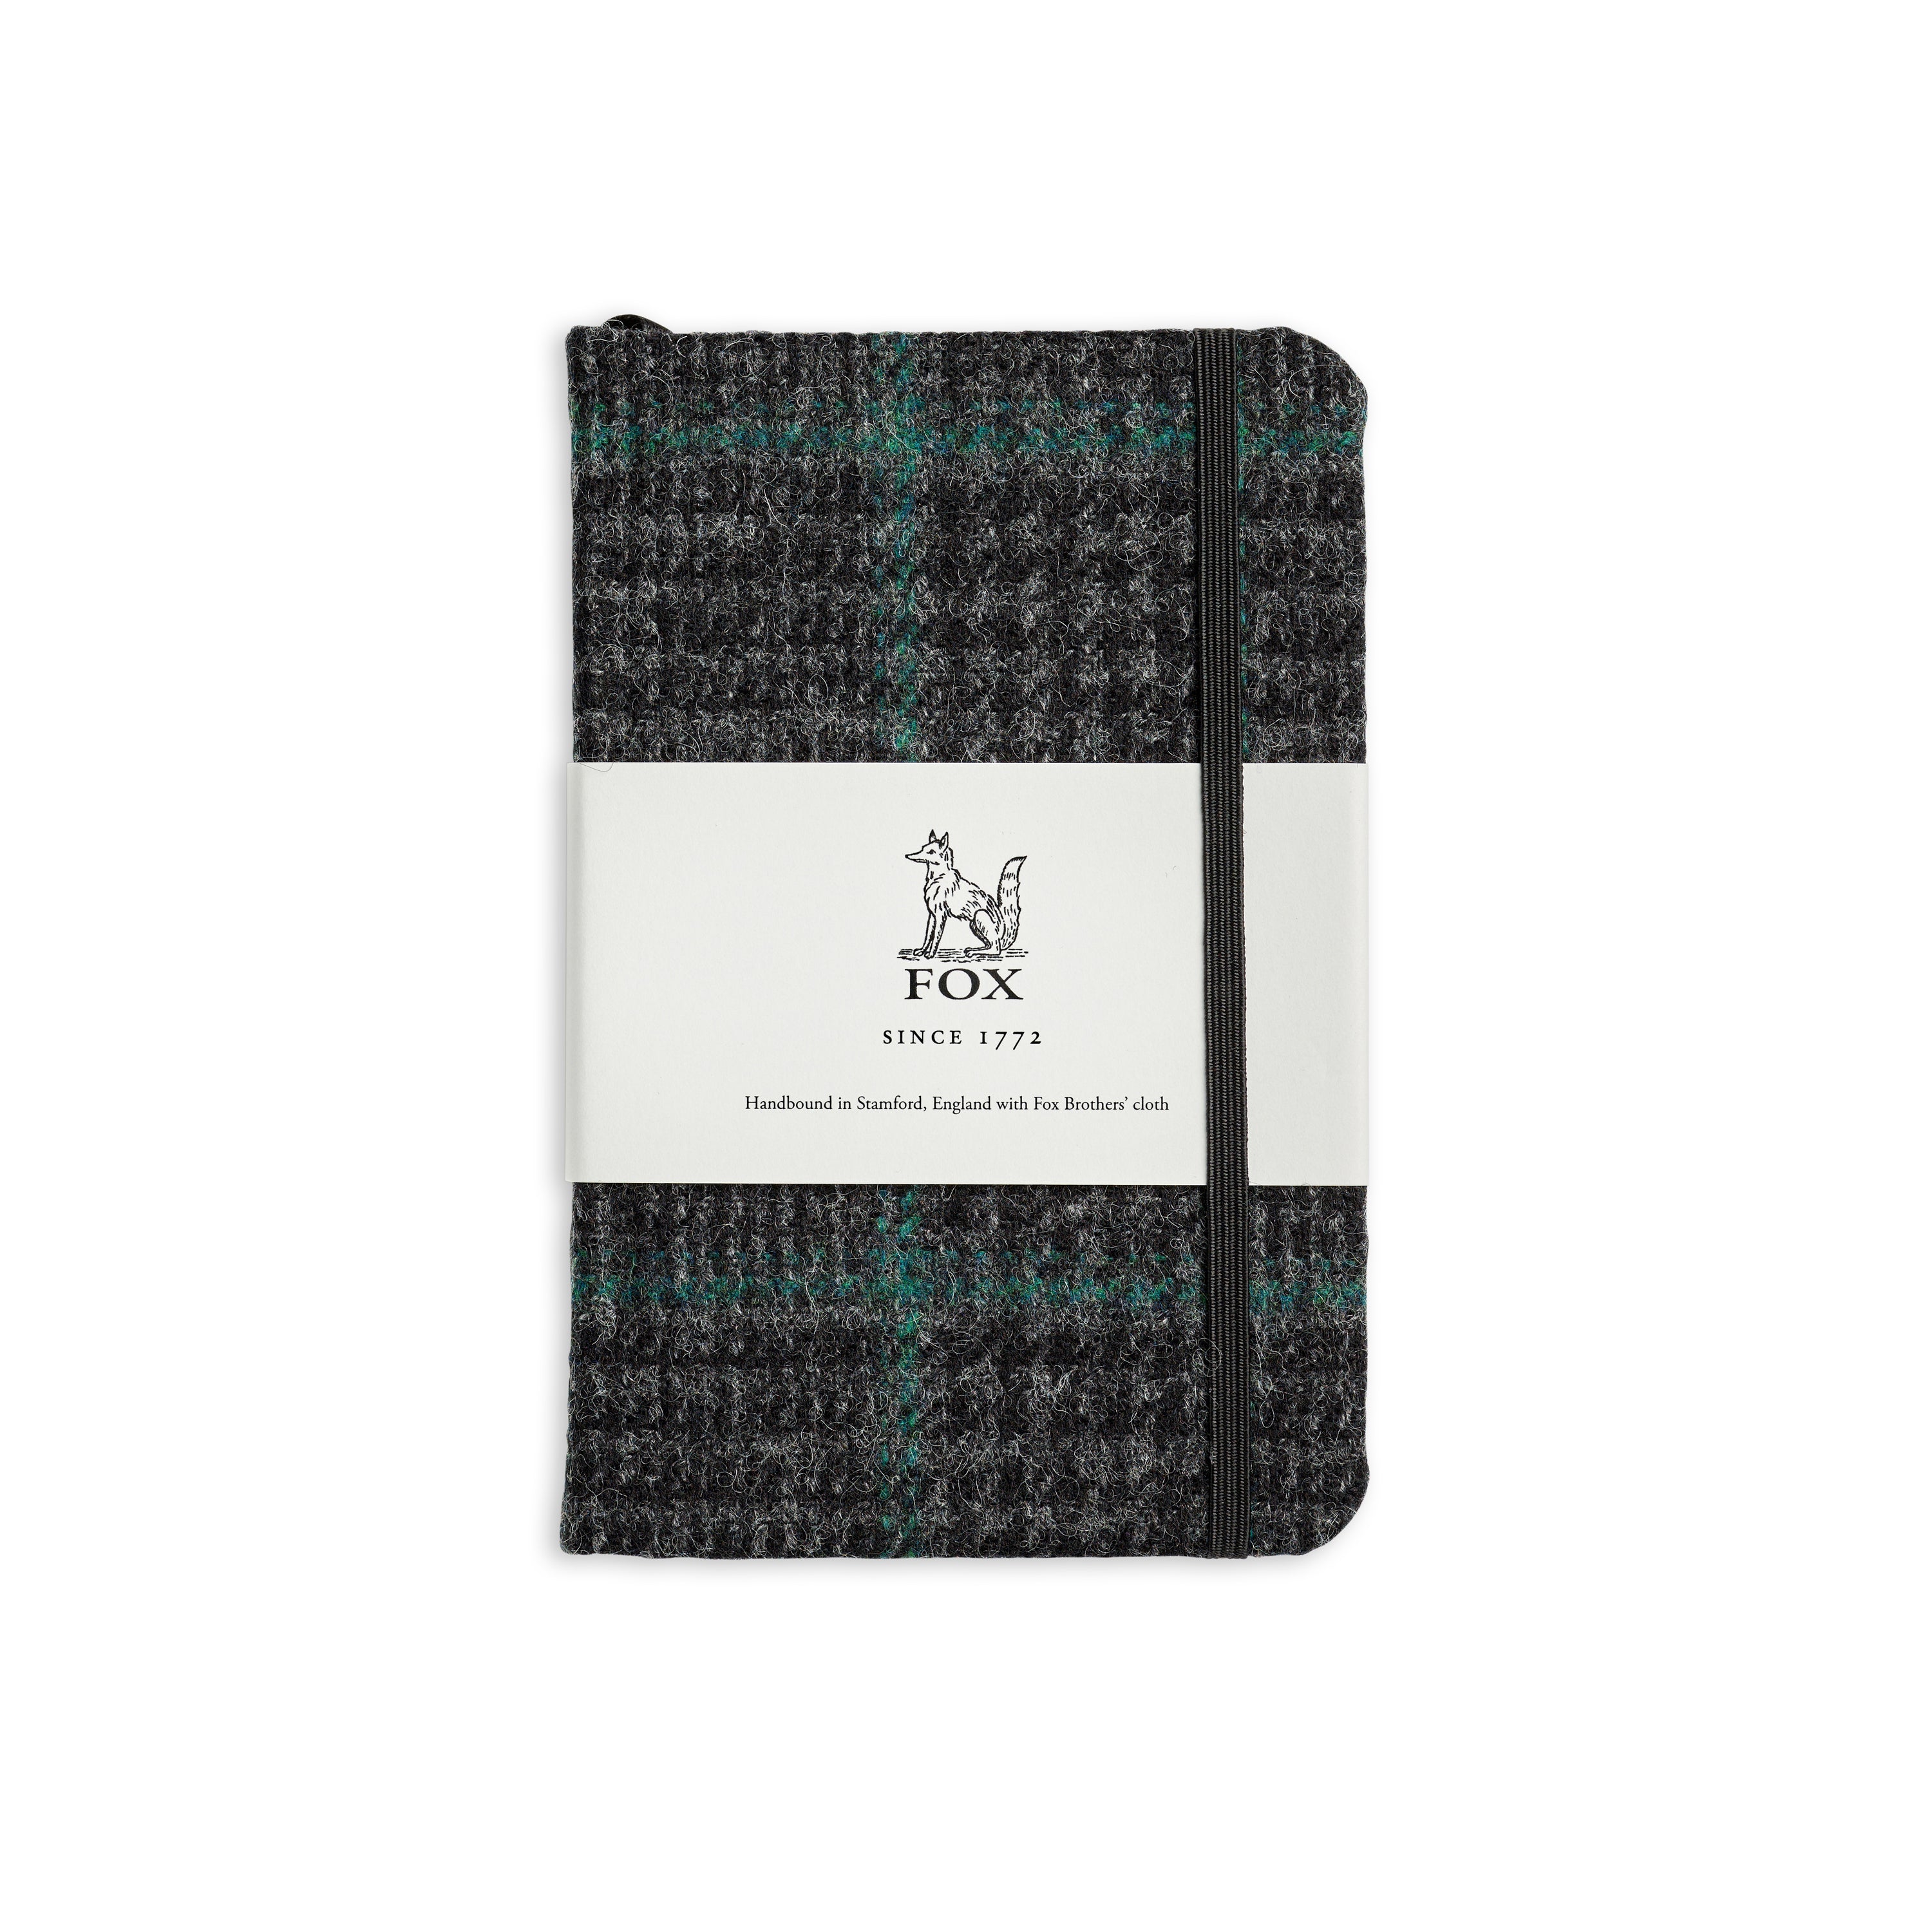 Fox Charcoal Glen Check with Emerald Deco Pocket Notebook